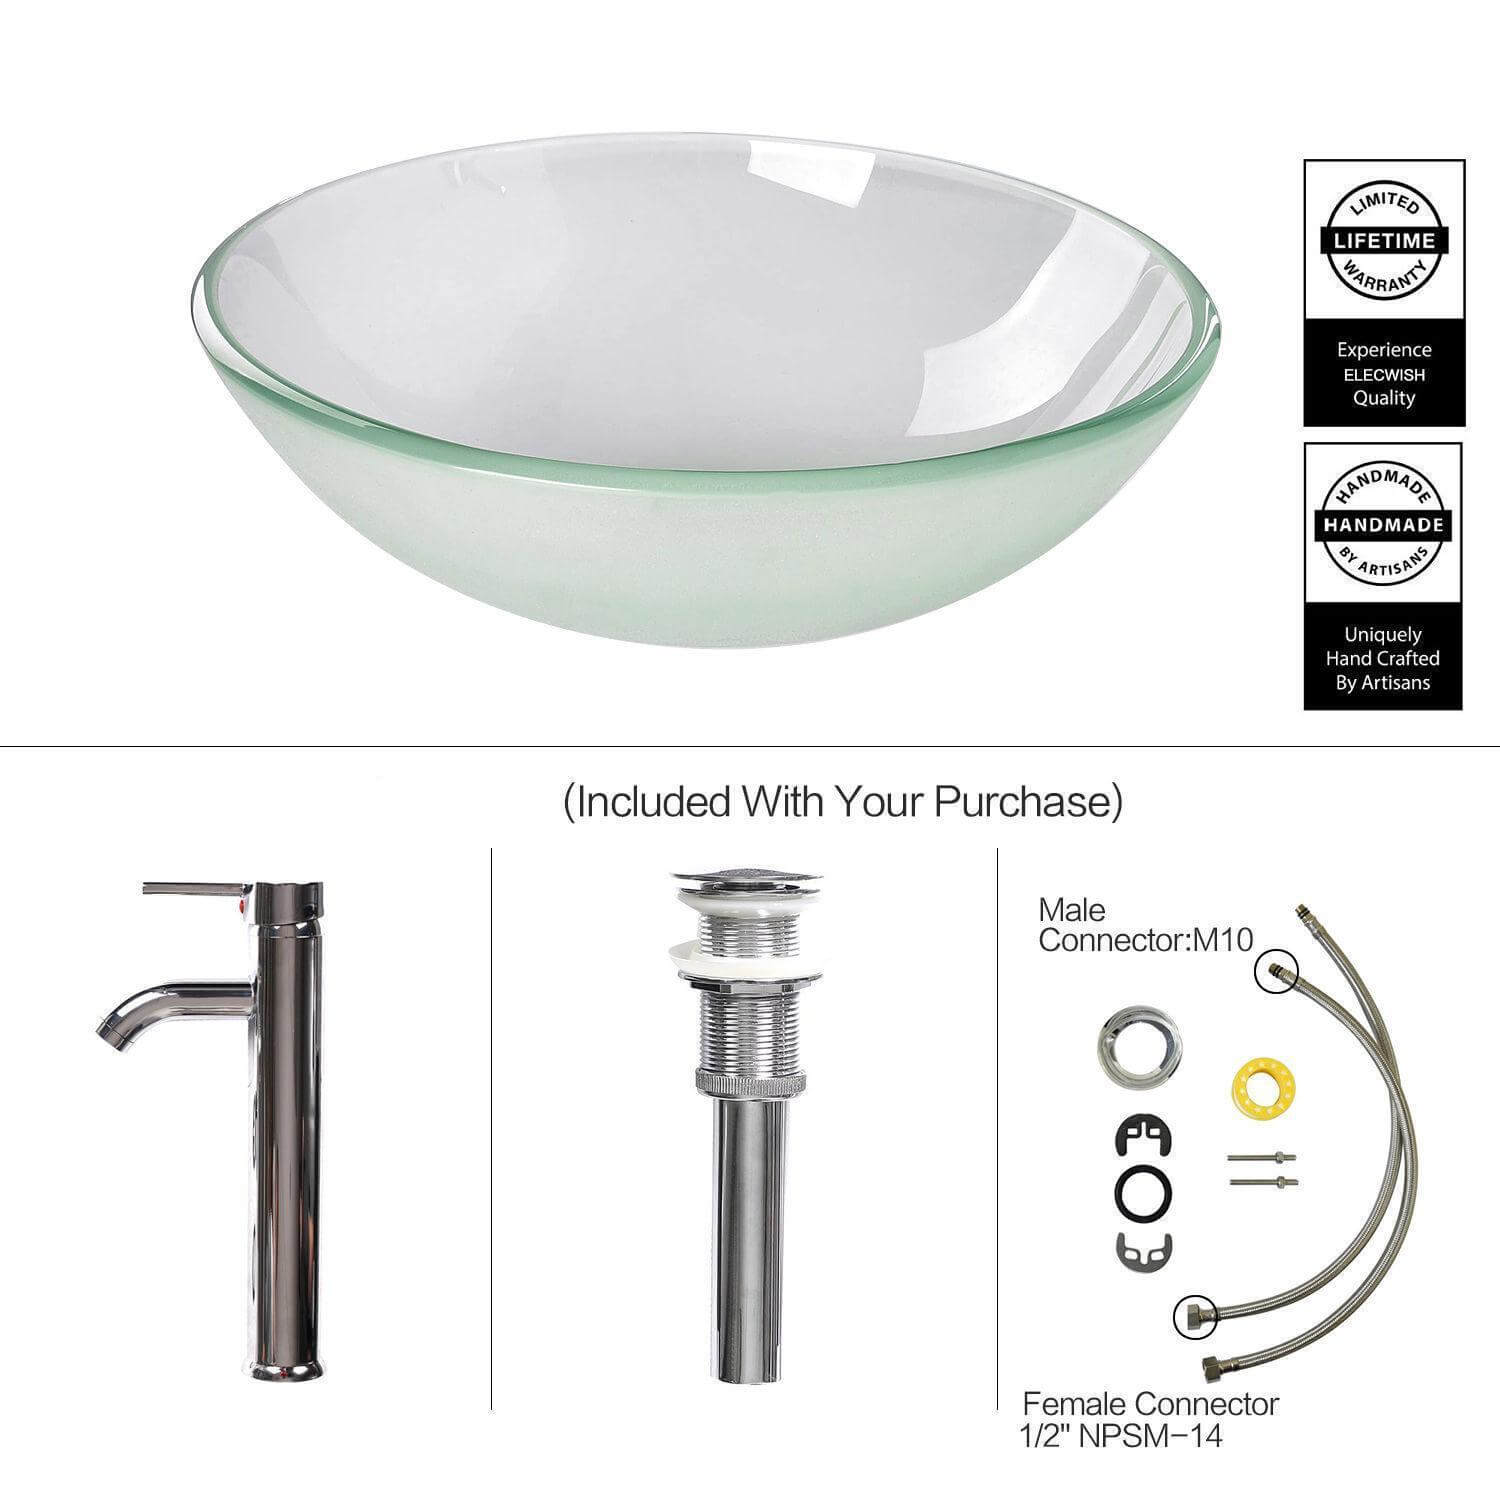 Elecwish clear green sink parts